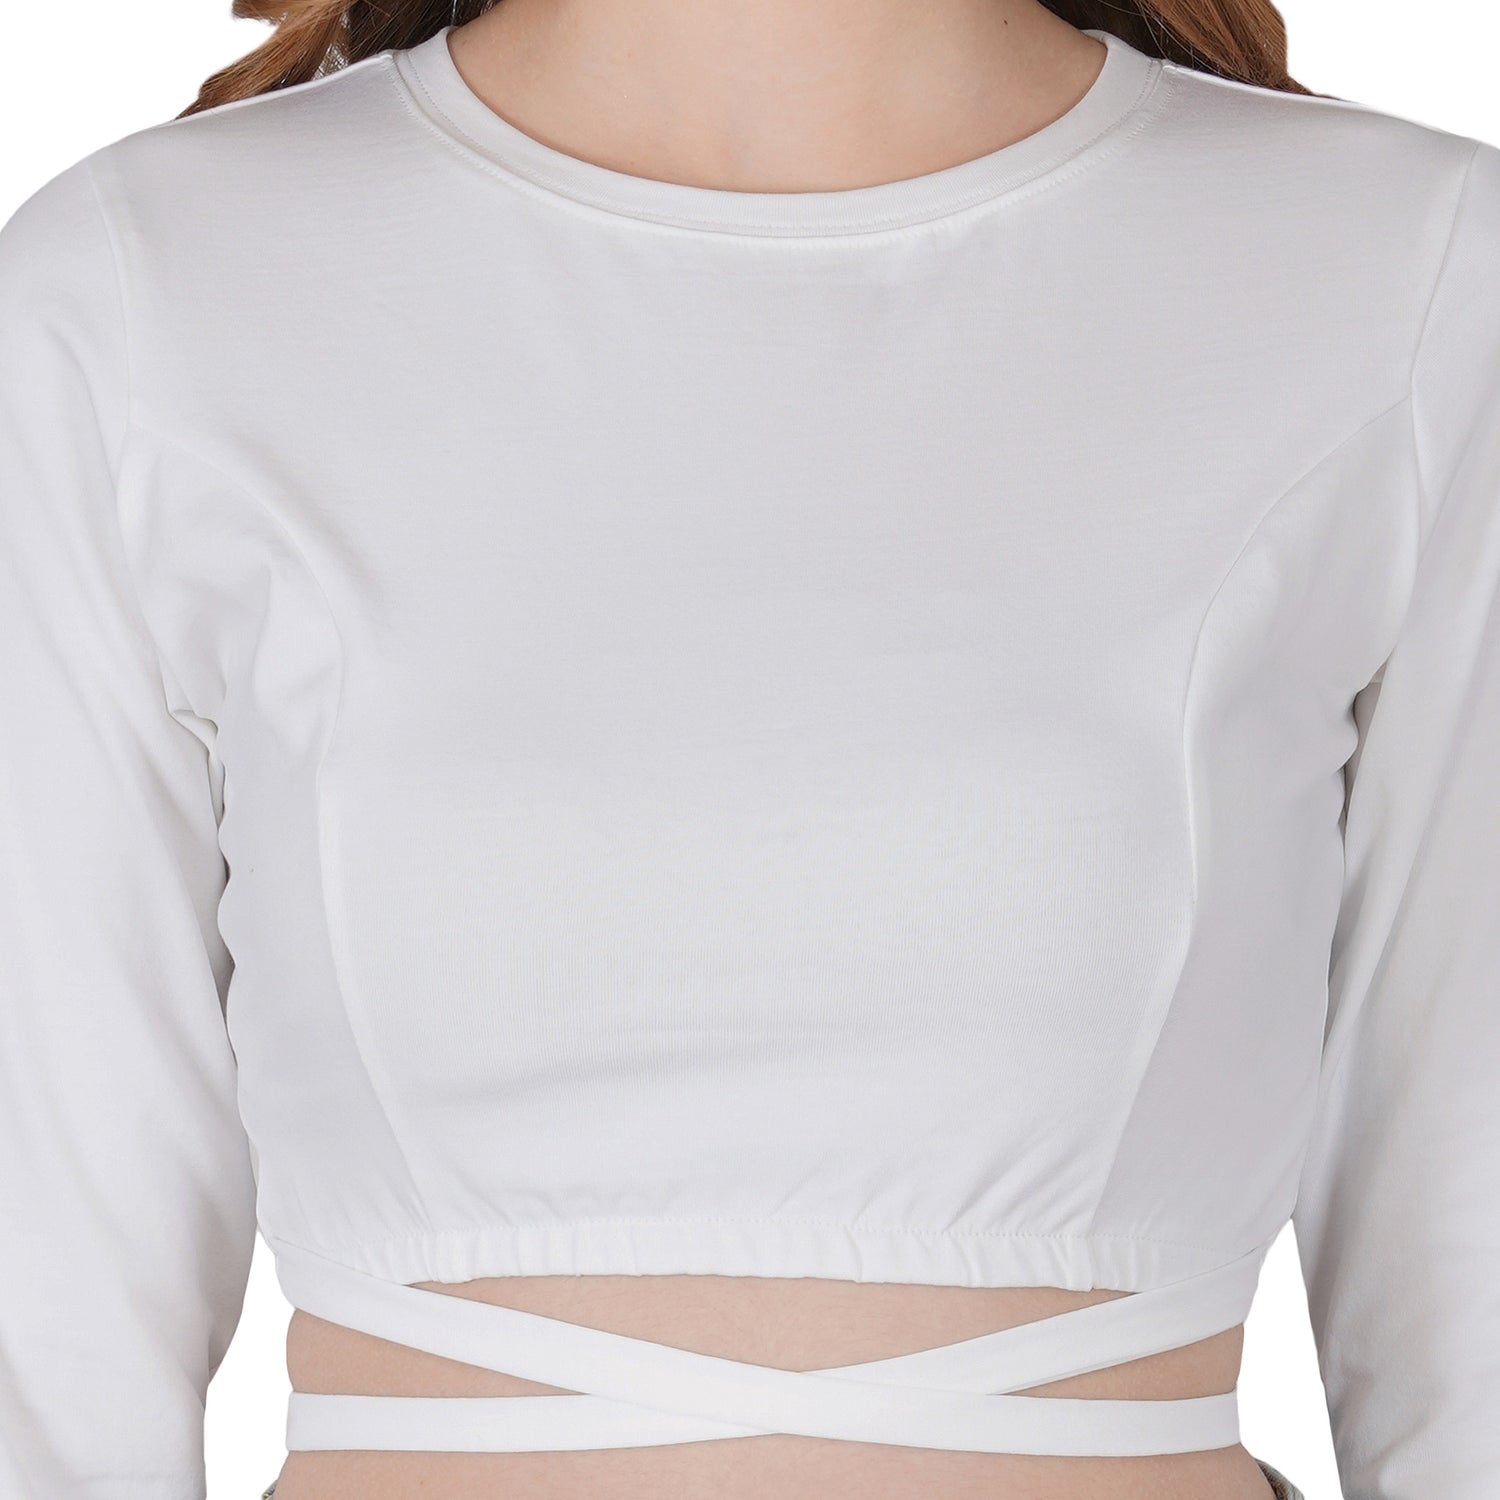 SLAY. Women's White Full Sleeves Crop Top with Back Wrap around Strings